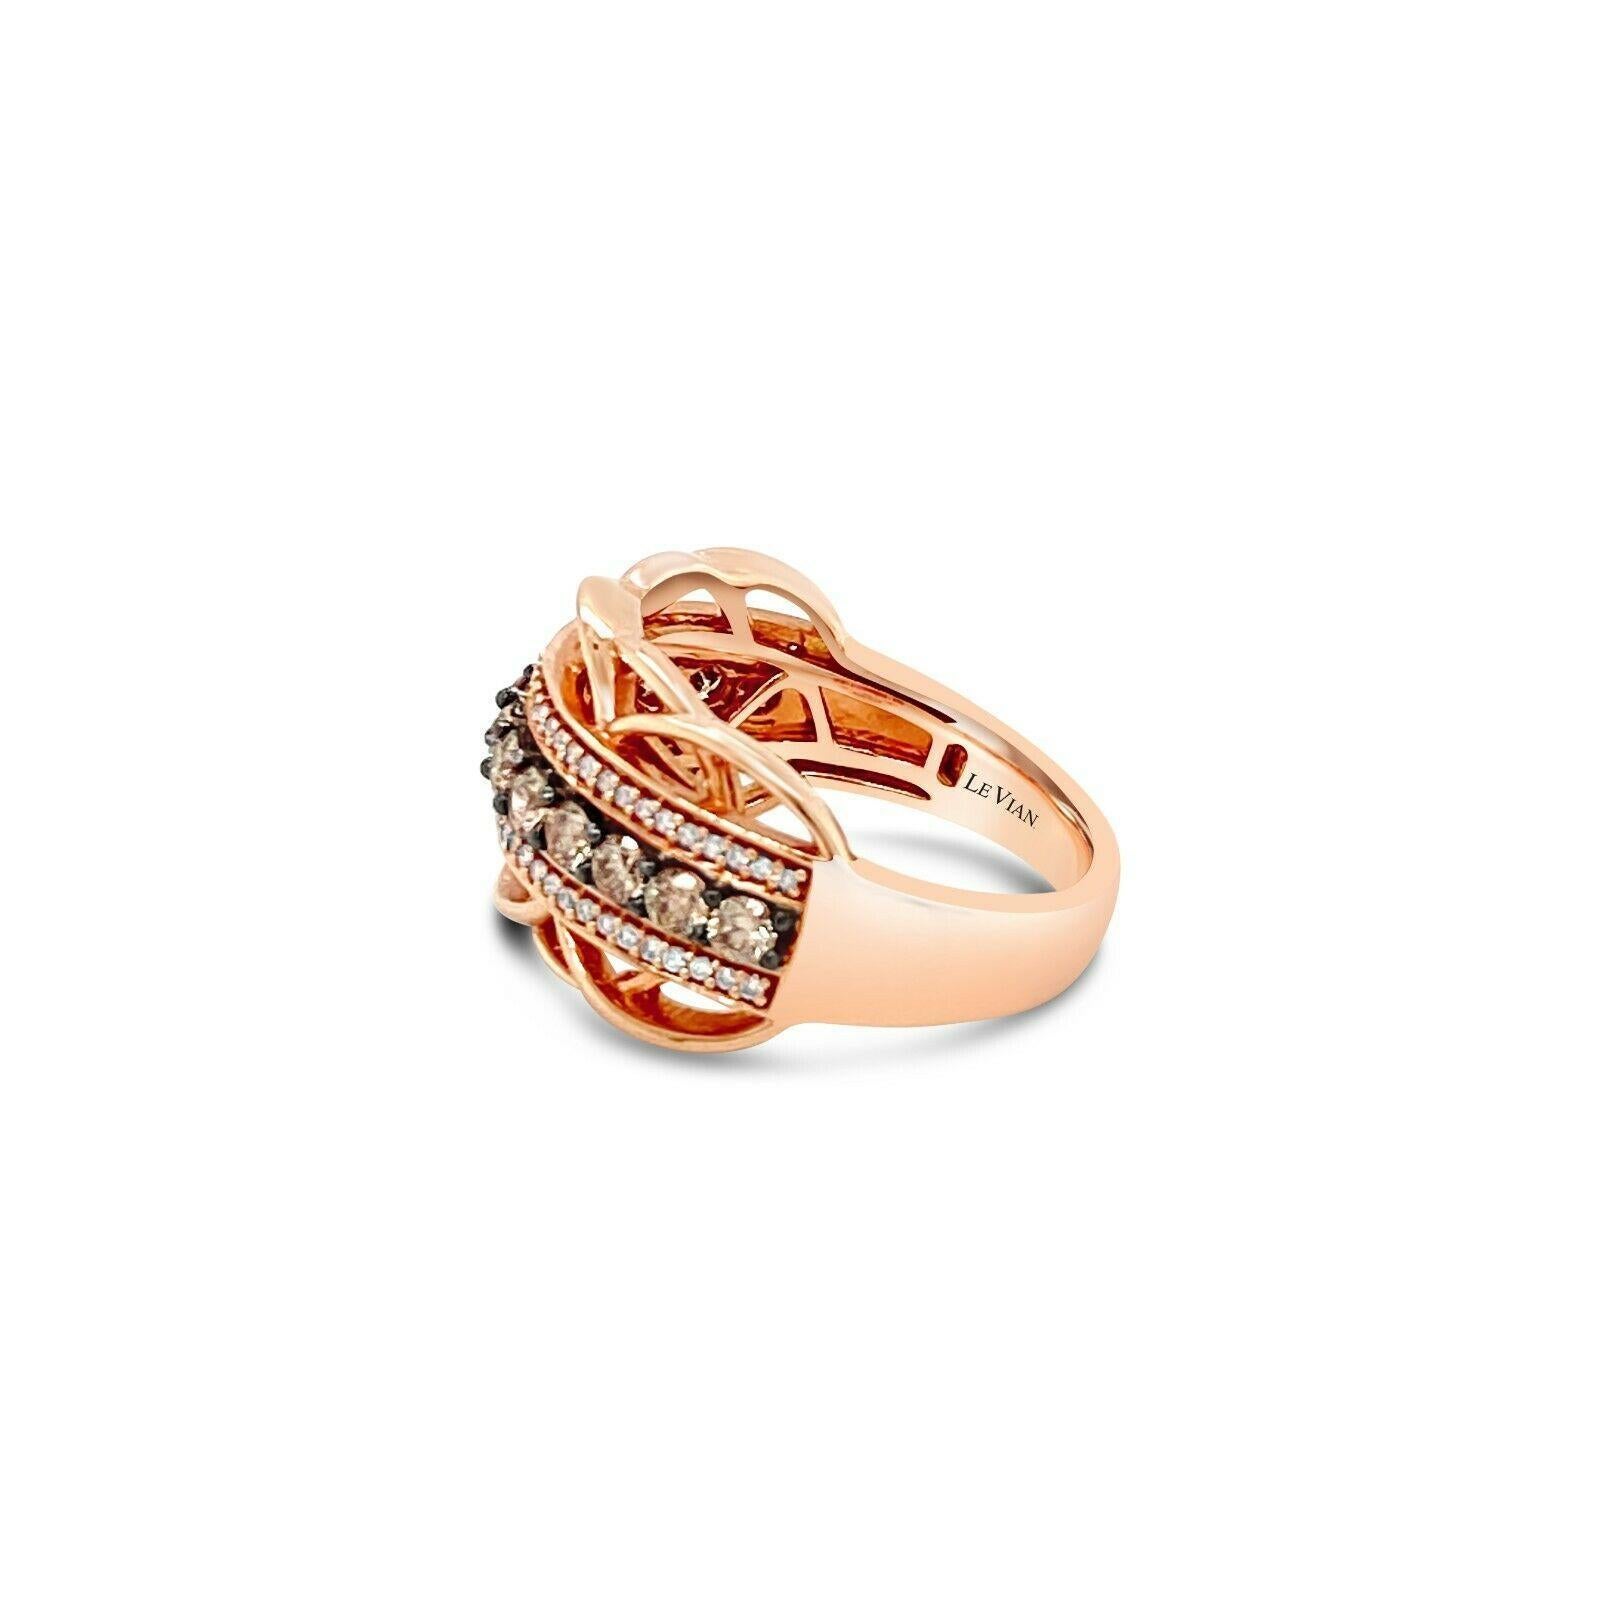 7/8 cts White Diamond Ring in 14K Rose Gold by Le Vian